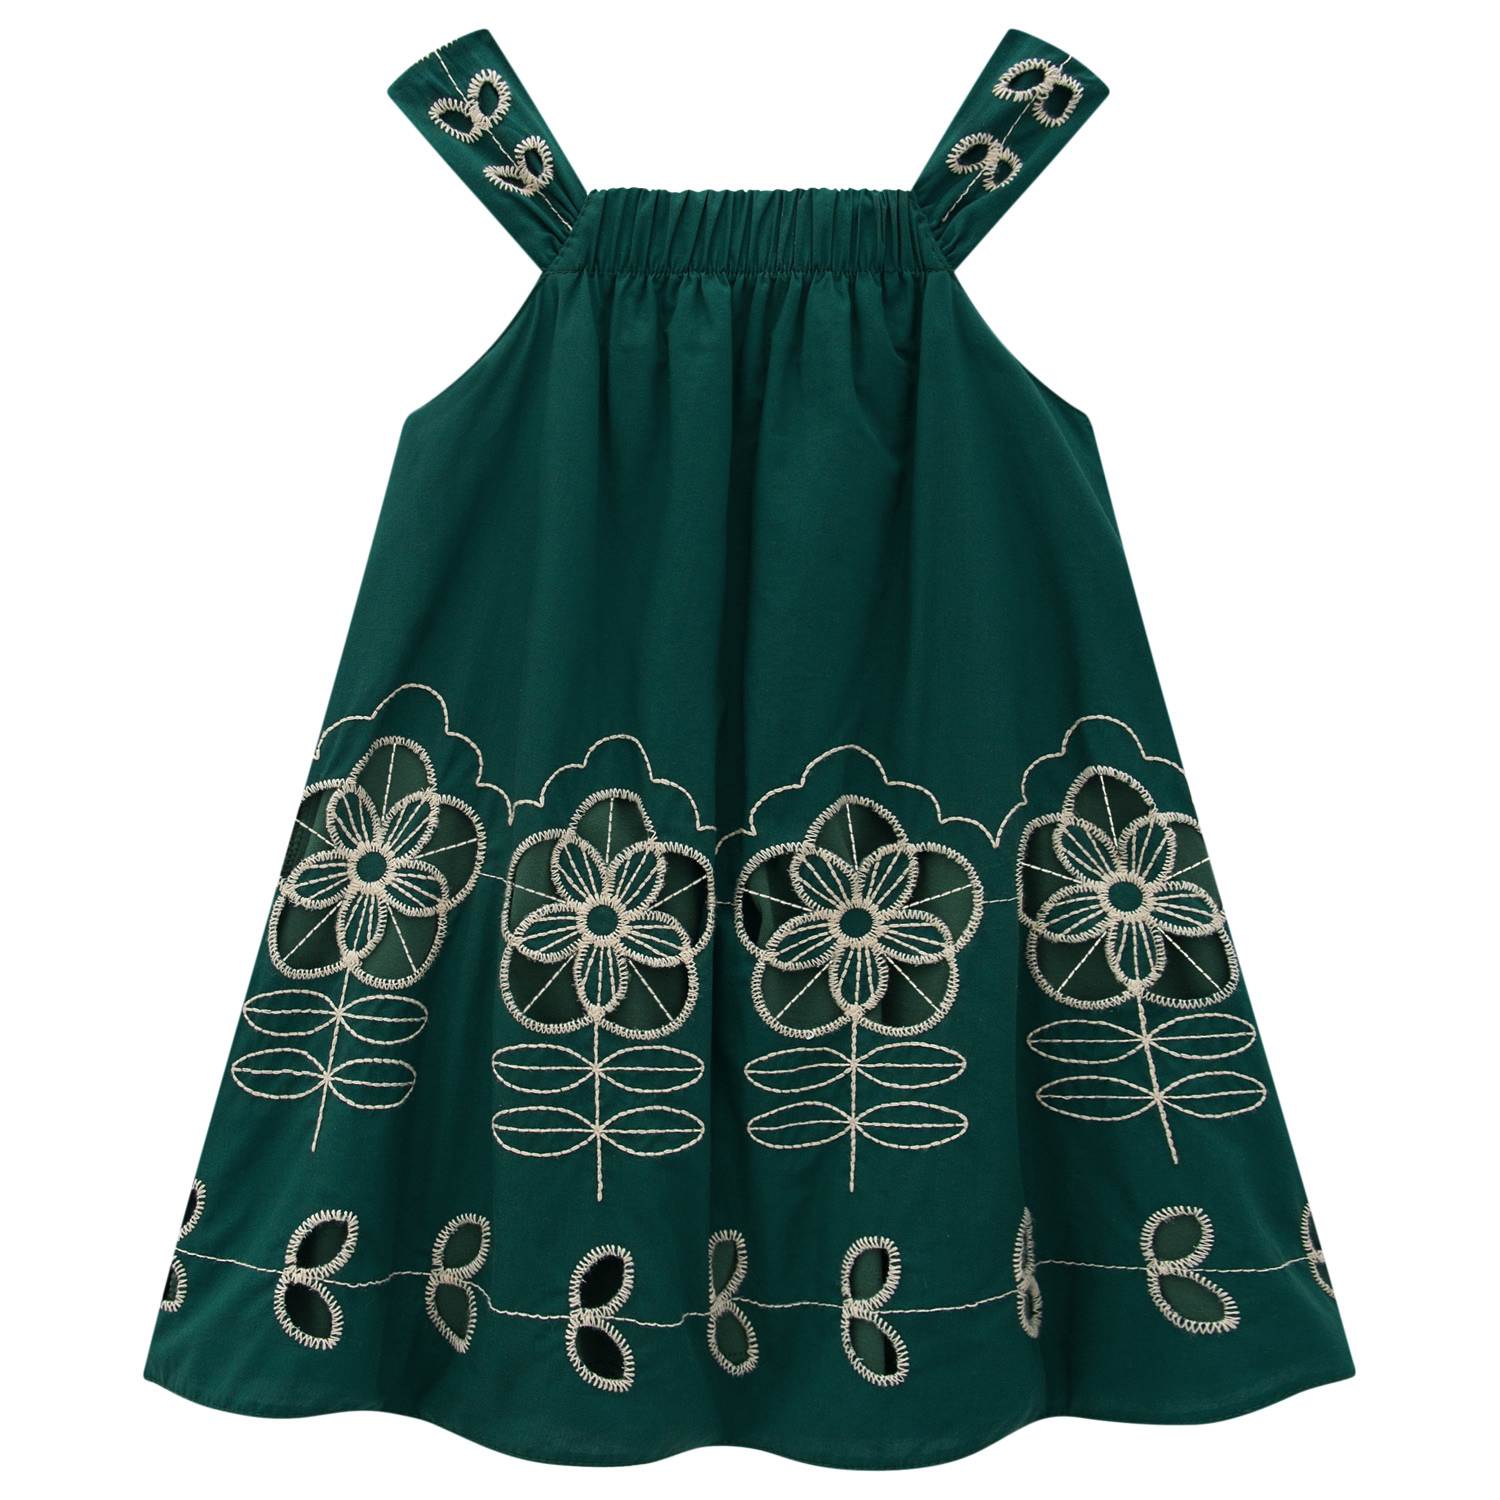 Emerald Ribbon Embroidered Dress